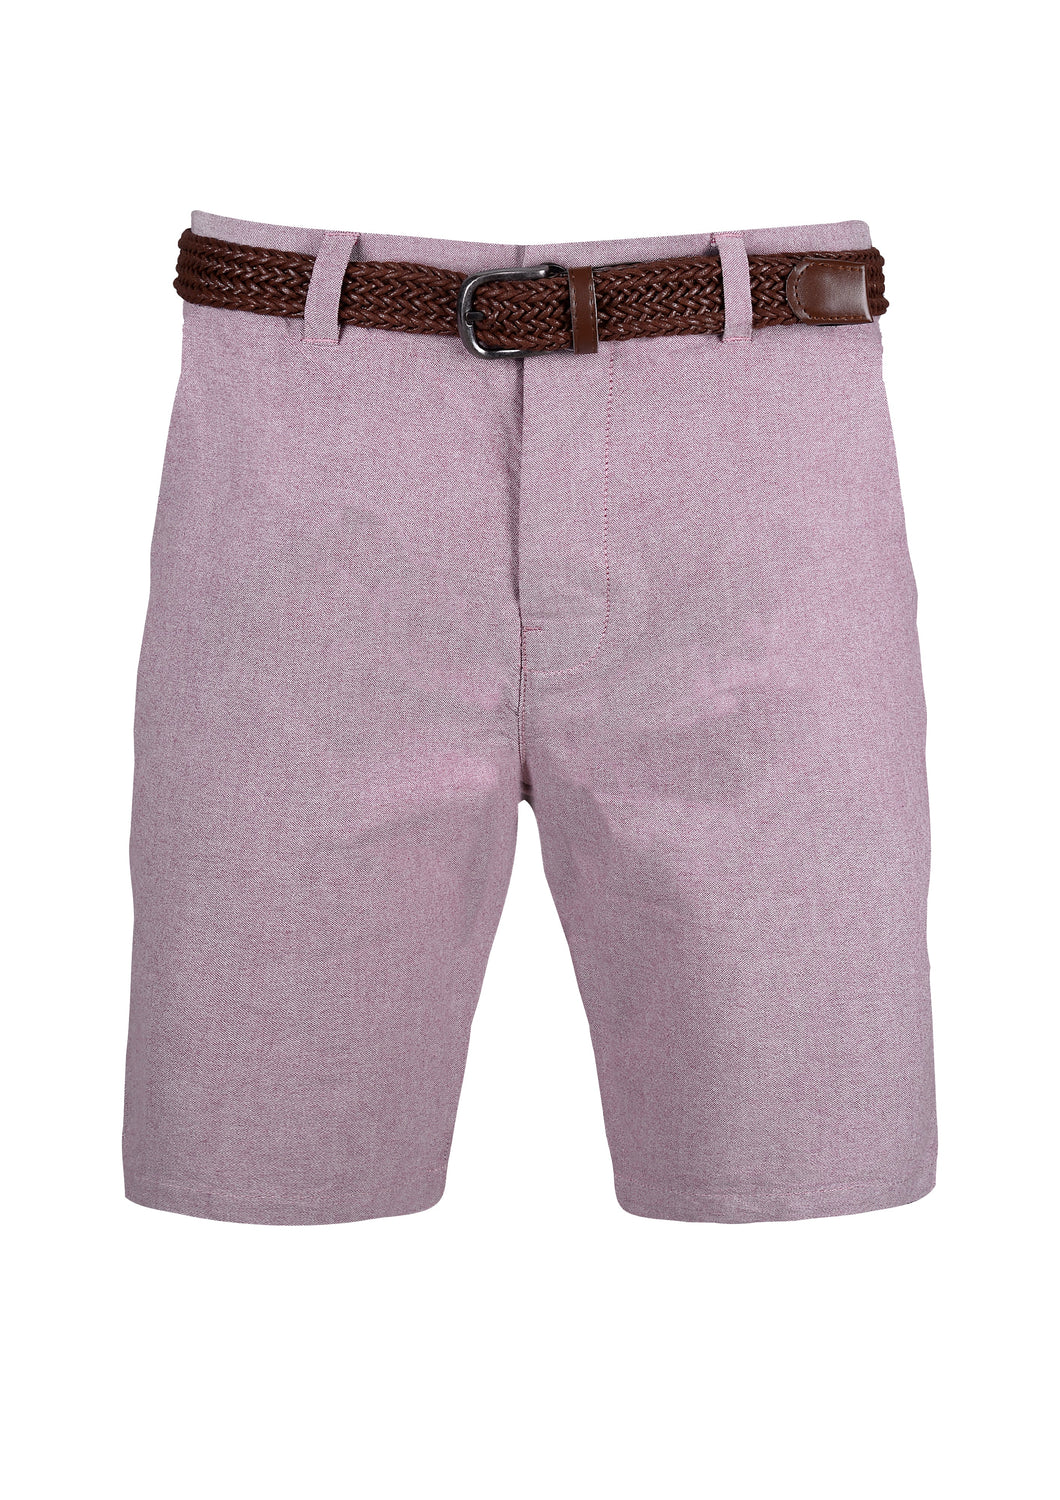 TAILORED OXFORD SHORTS WITH BELT - PINK